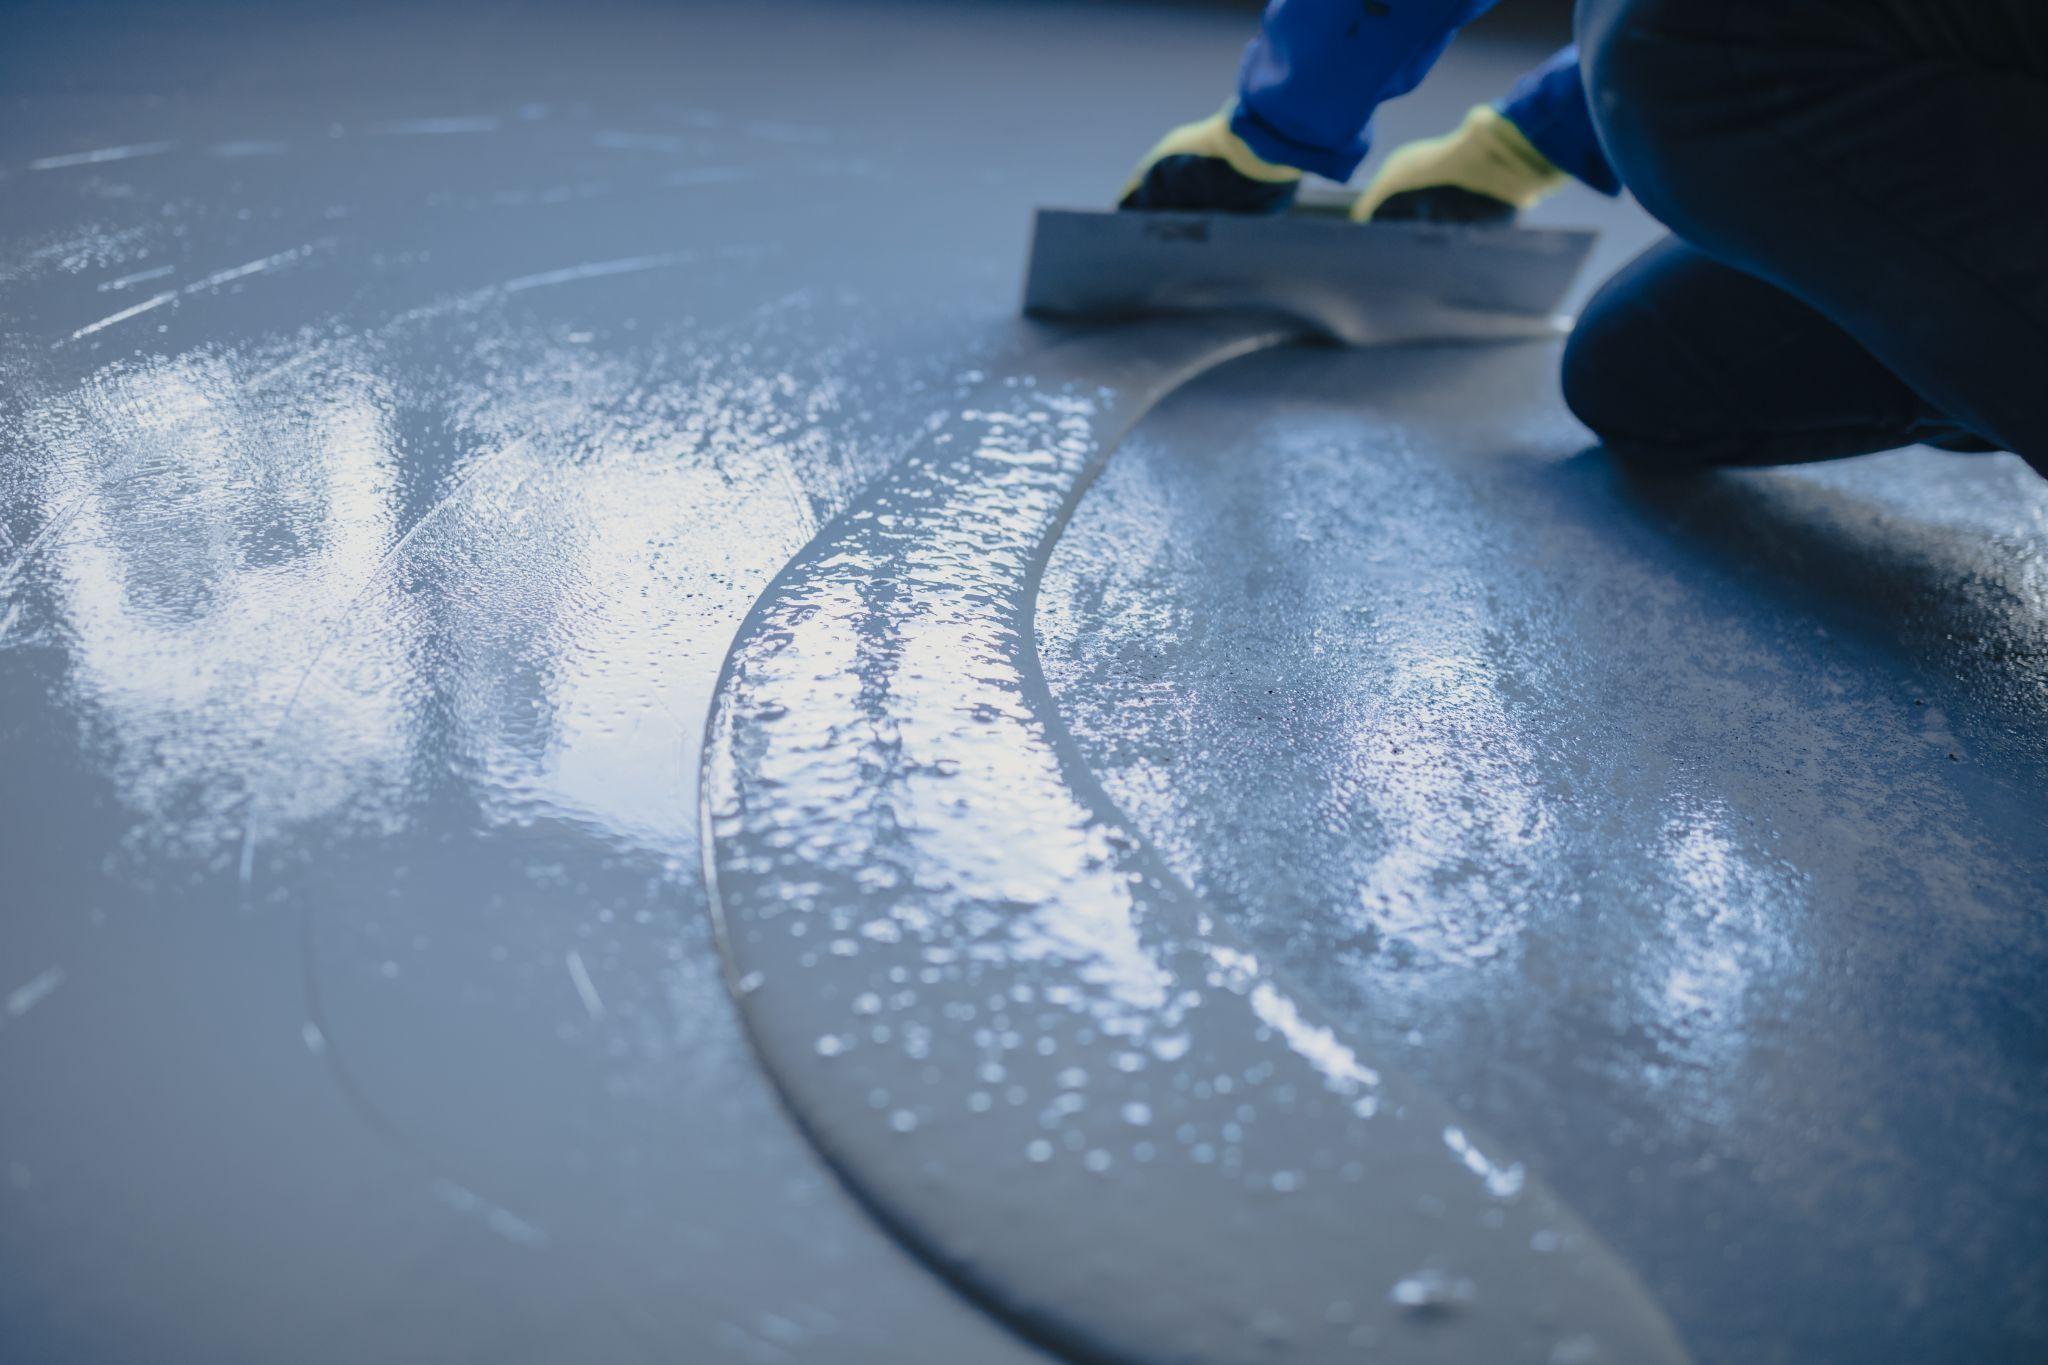 How To Choose The Right Concrete Stain For Your Home?